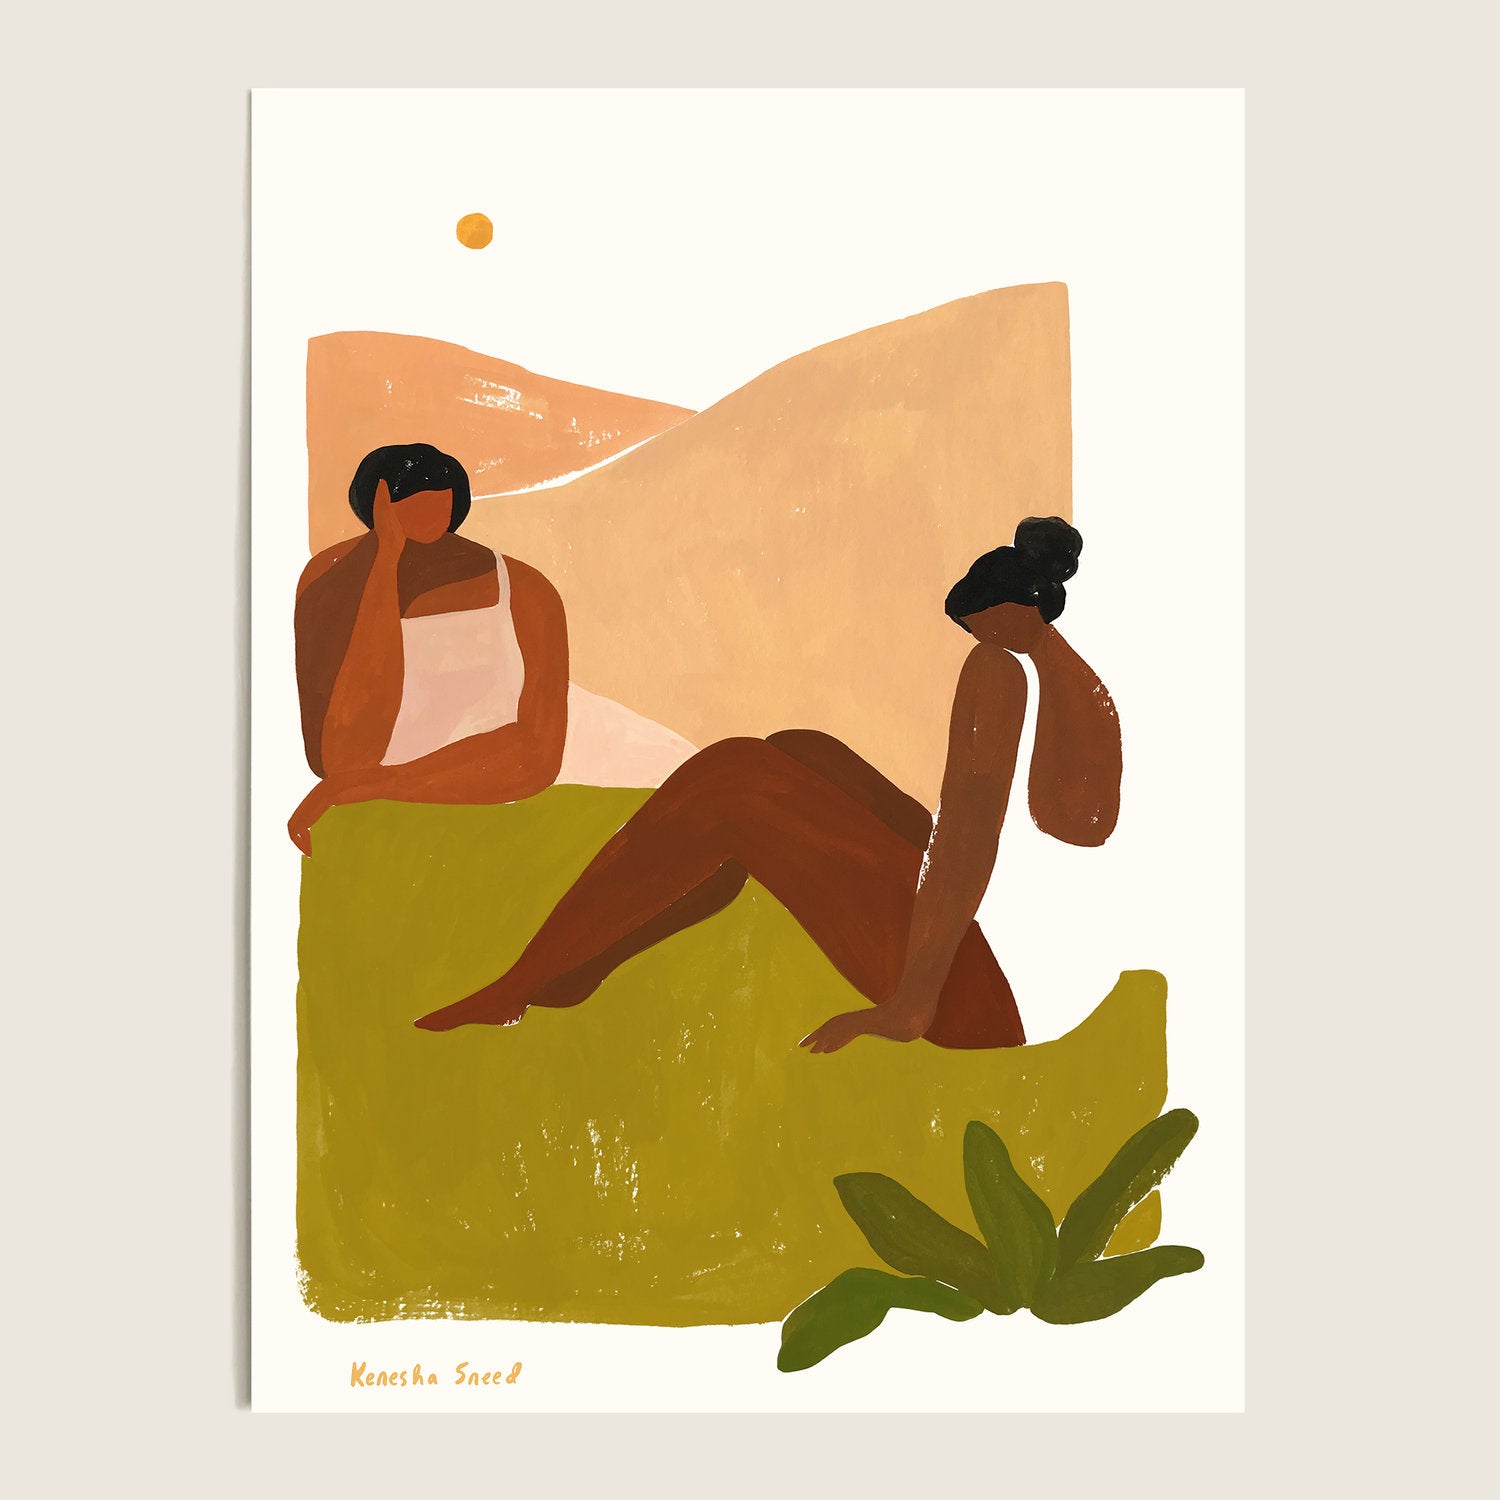 Print by Tactile Matter featuring two women